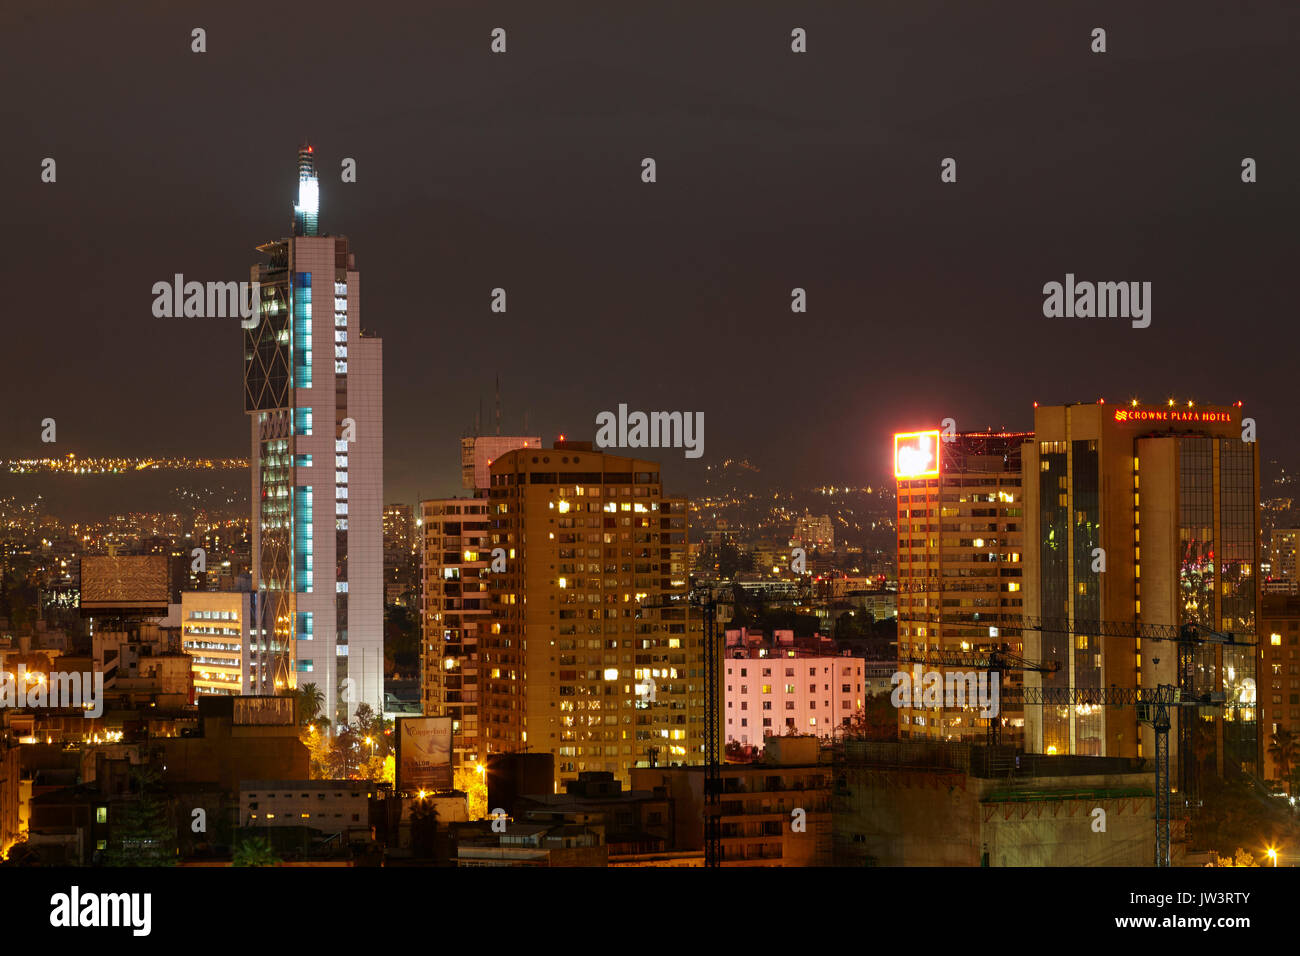 Apartments at dusk, Santiago, Chile, South America Stock Photo